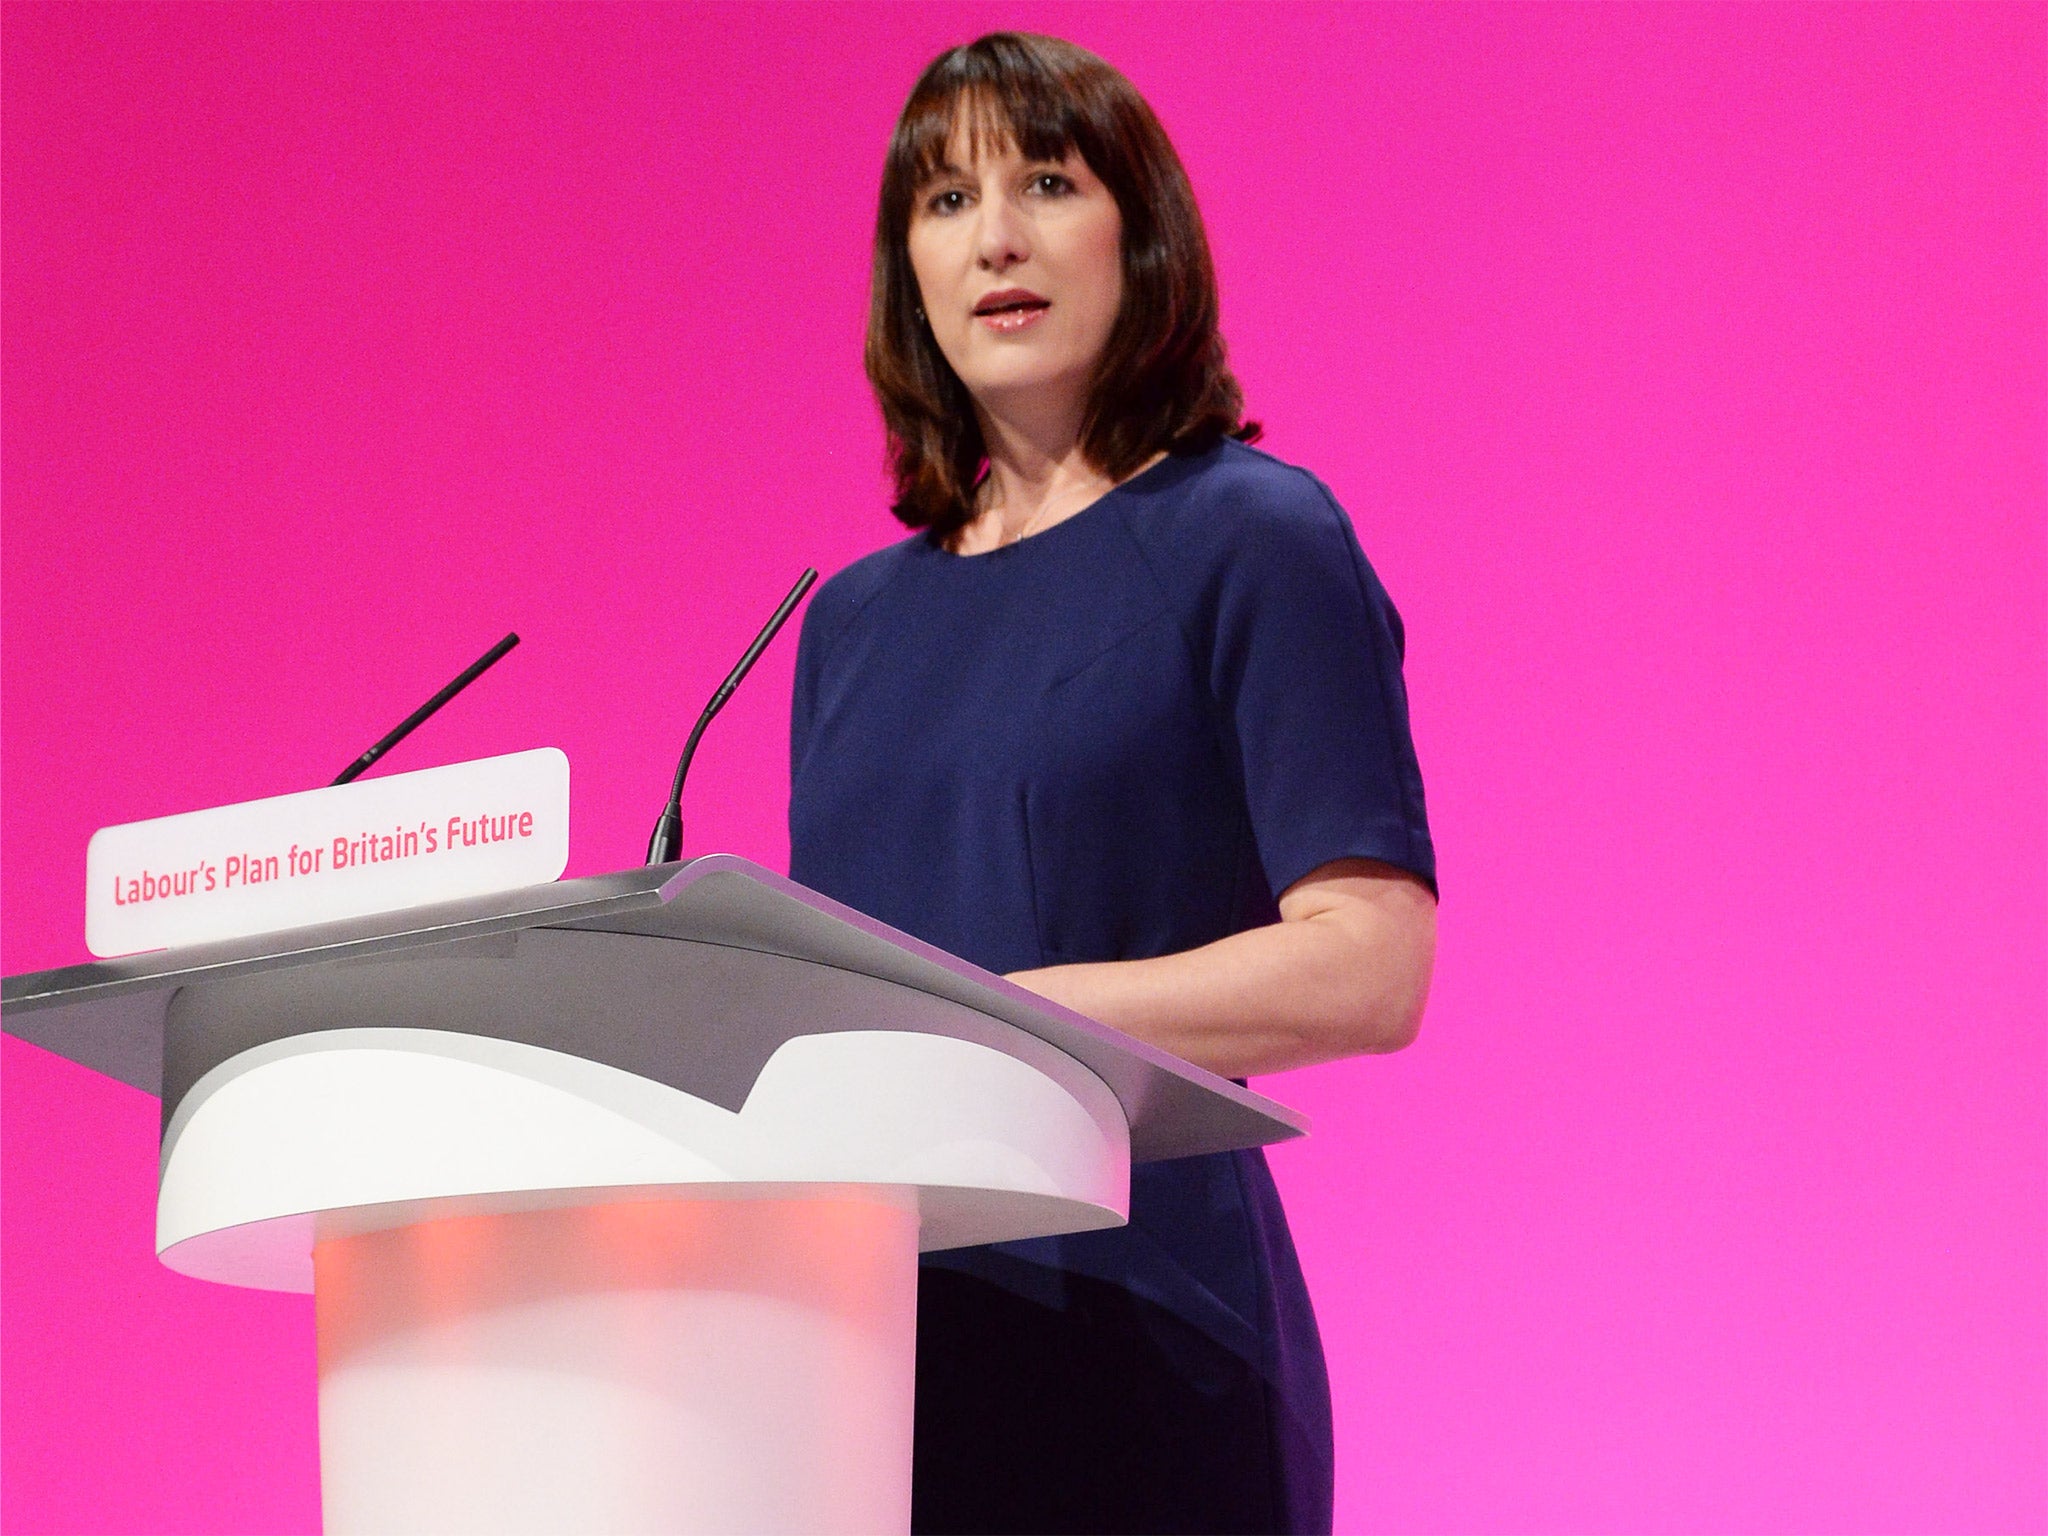 Rachel Reeves, the Shadow Work and Pensions Minister